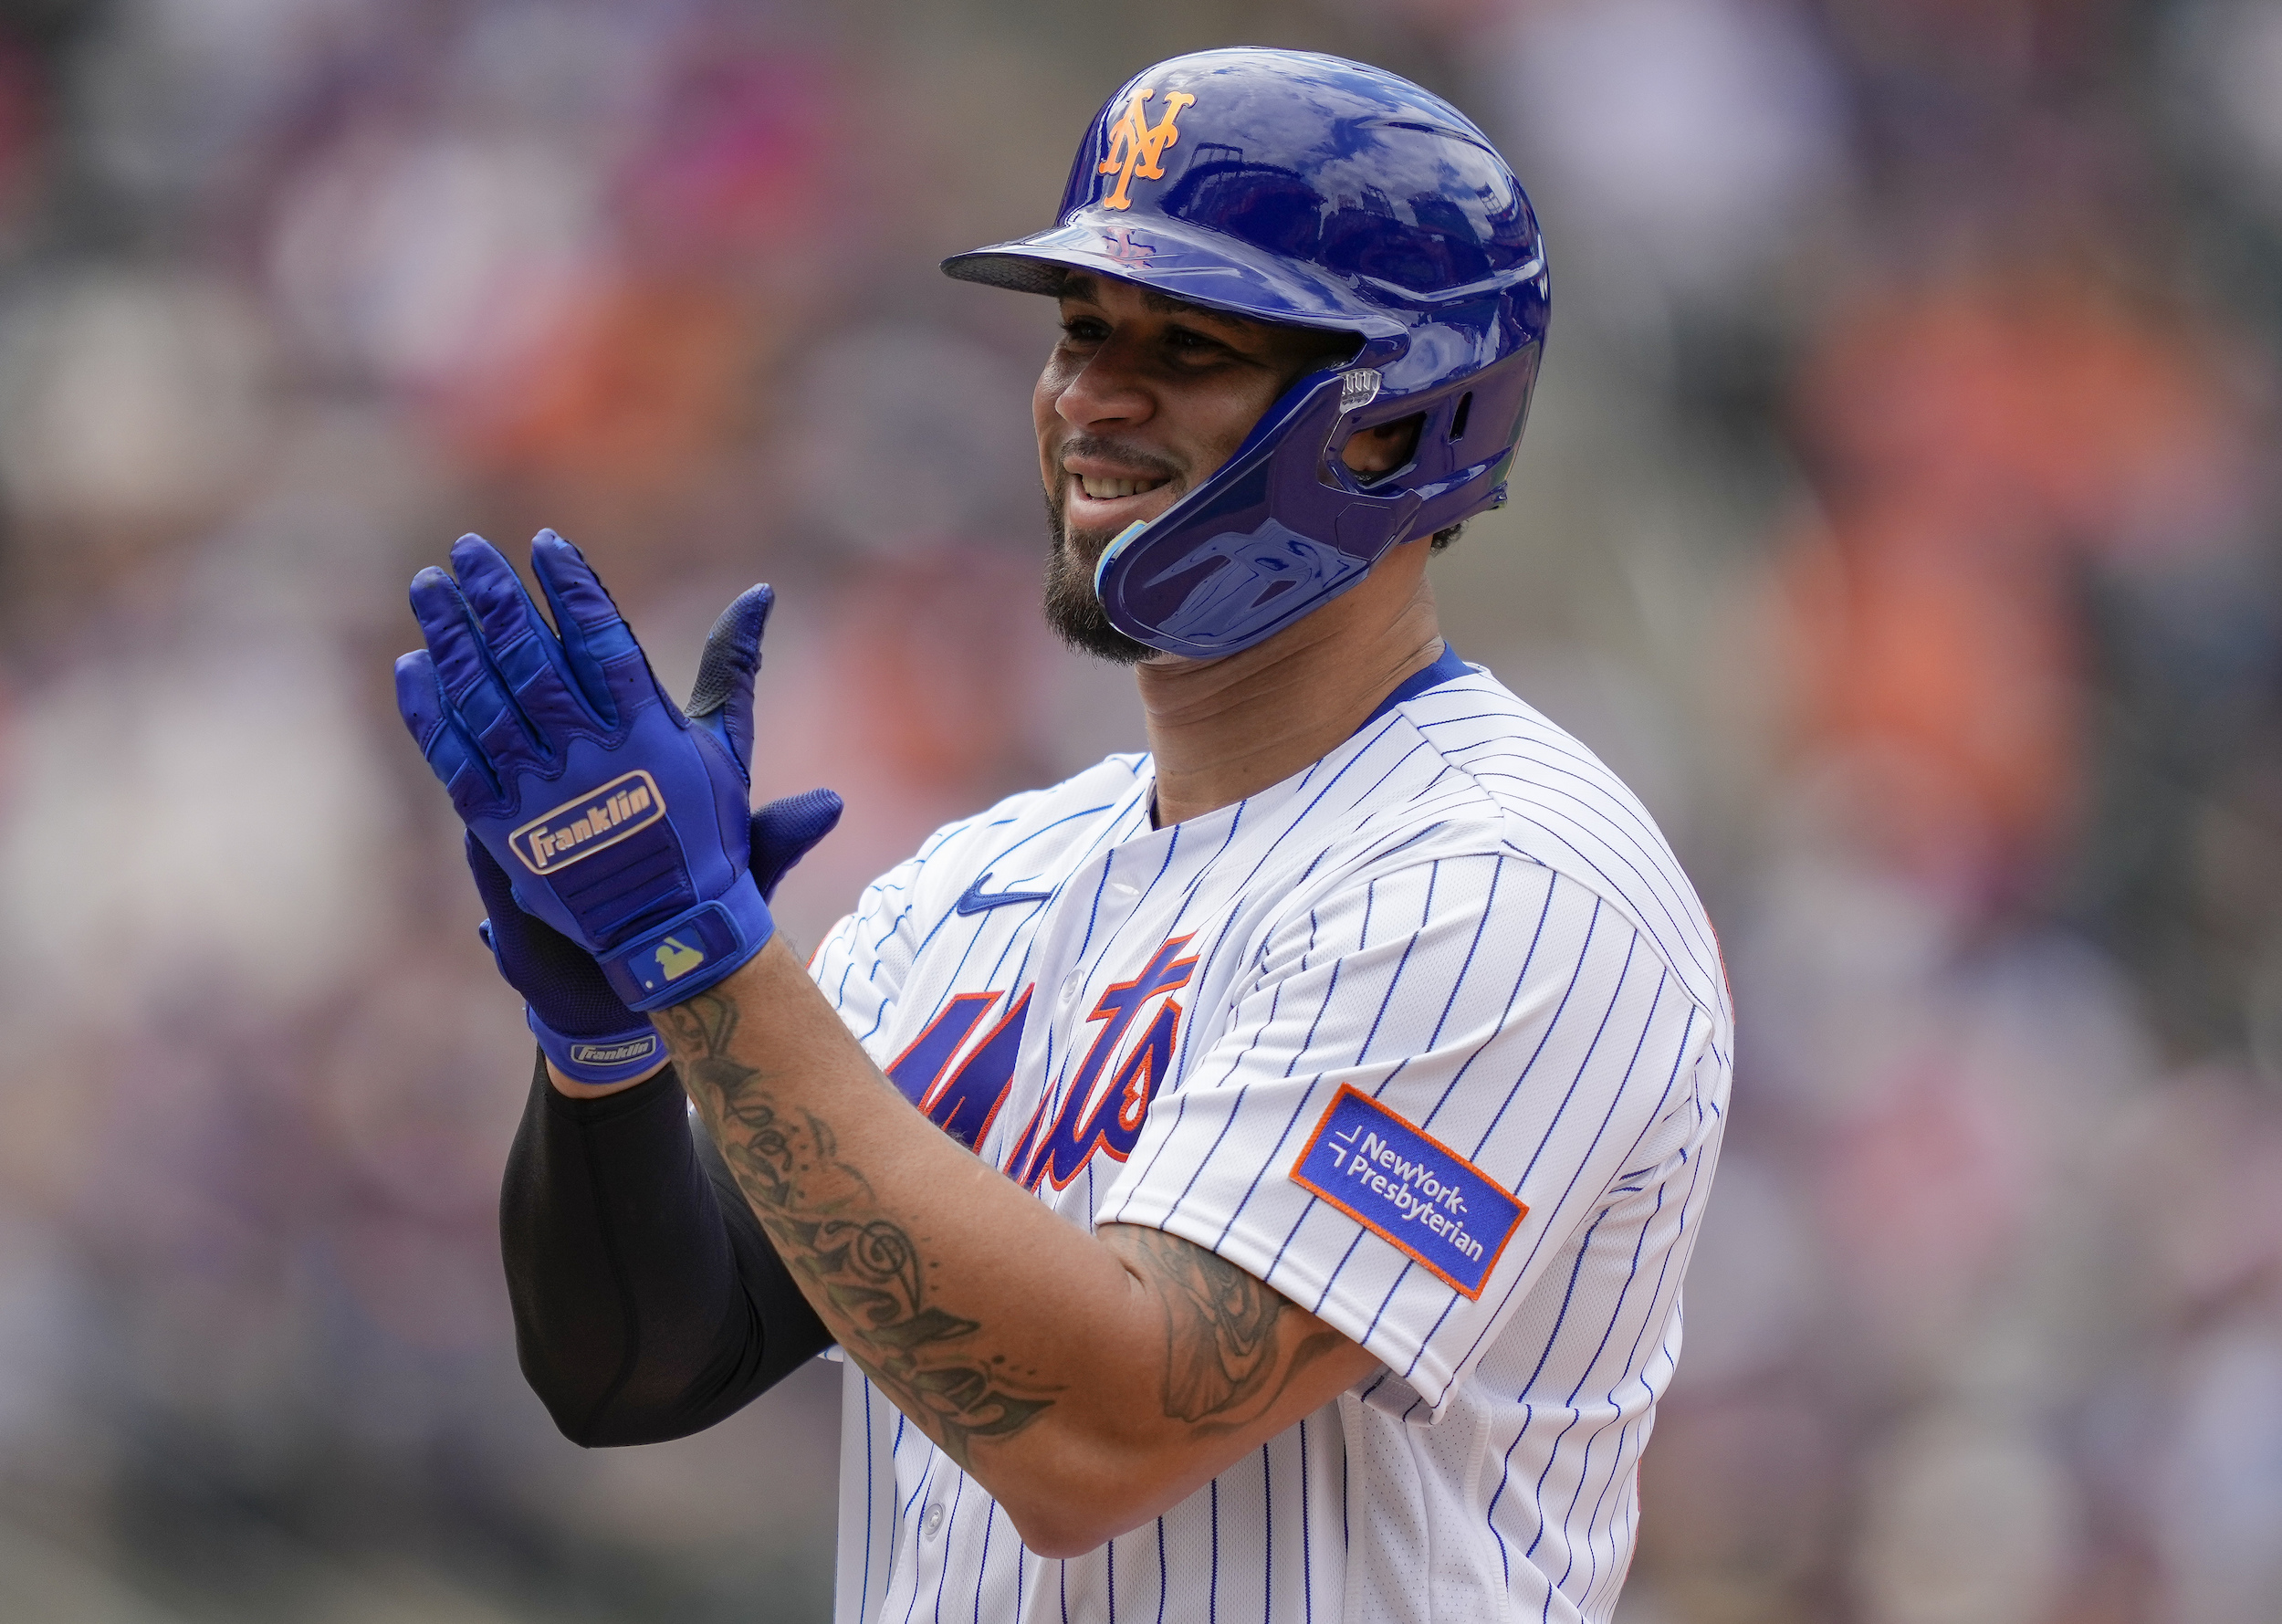 Gary Sanchez tearing it up with Padres after Mets castoff